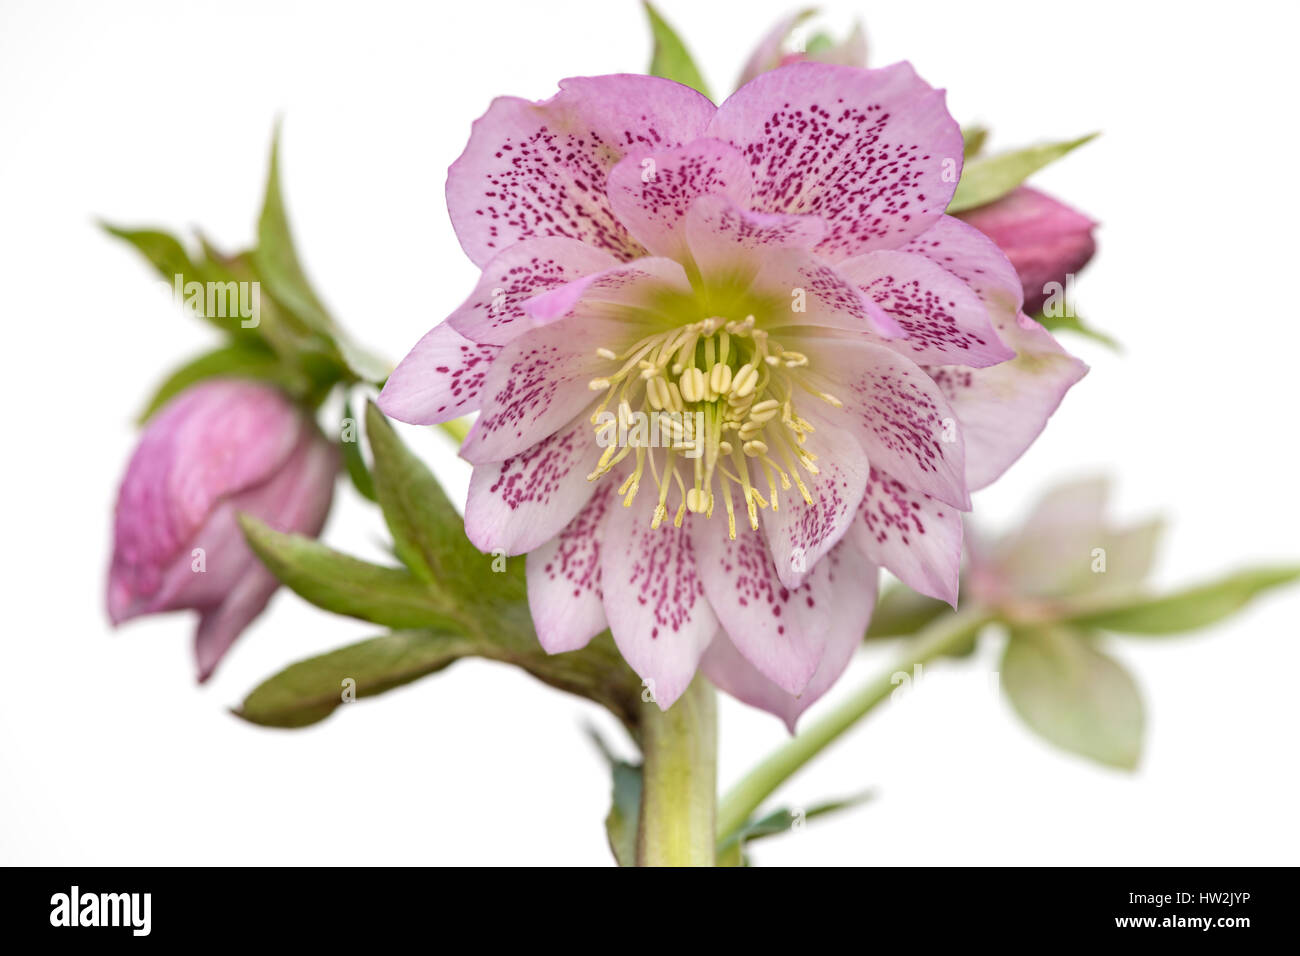 Close-up image of the double-flowered spring pink Hellebore flower, taken against a white background. Stock Photo